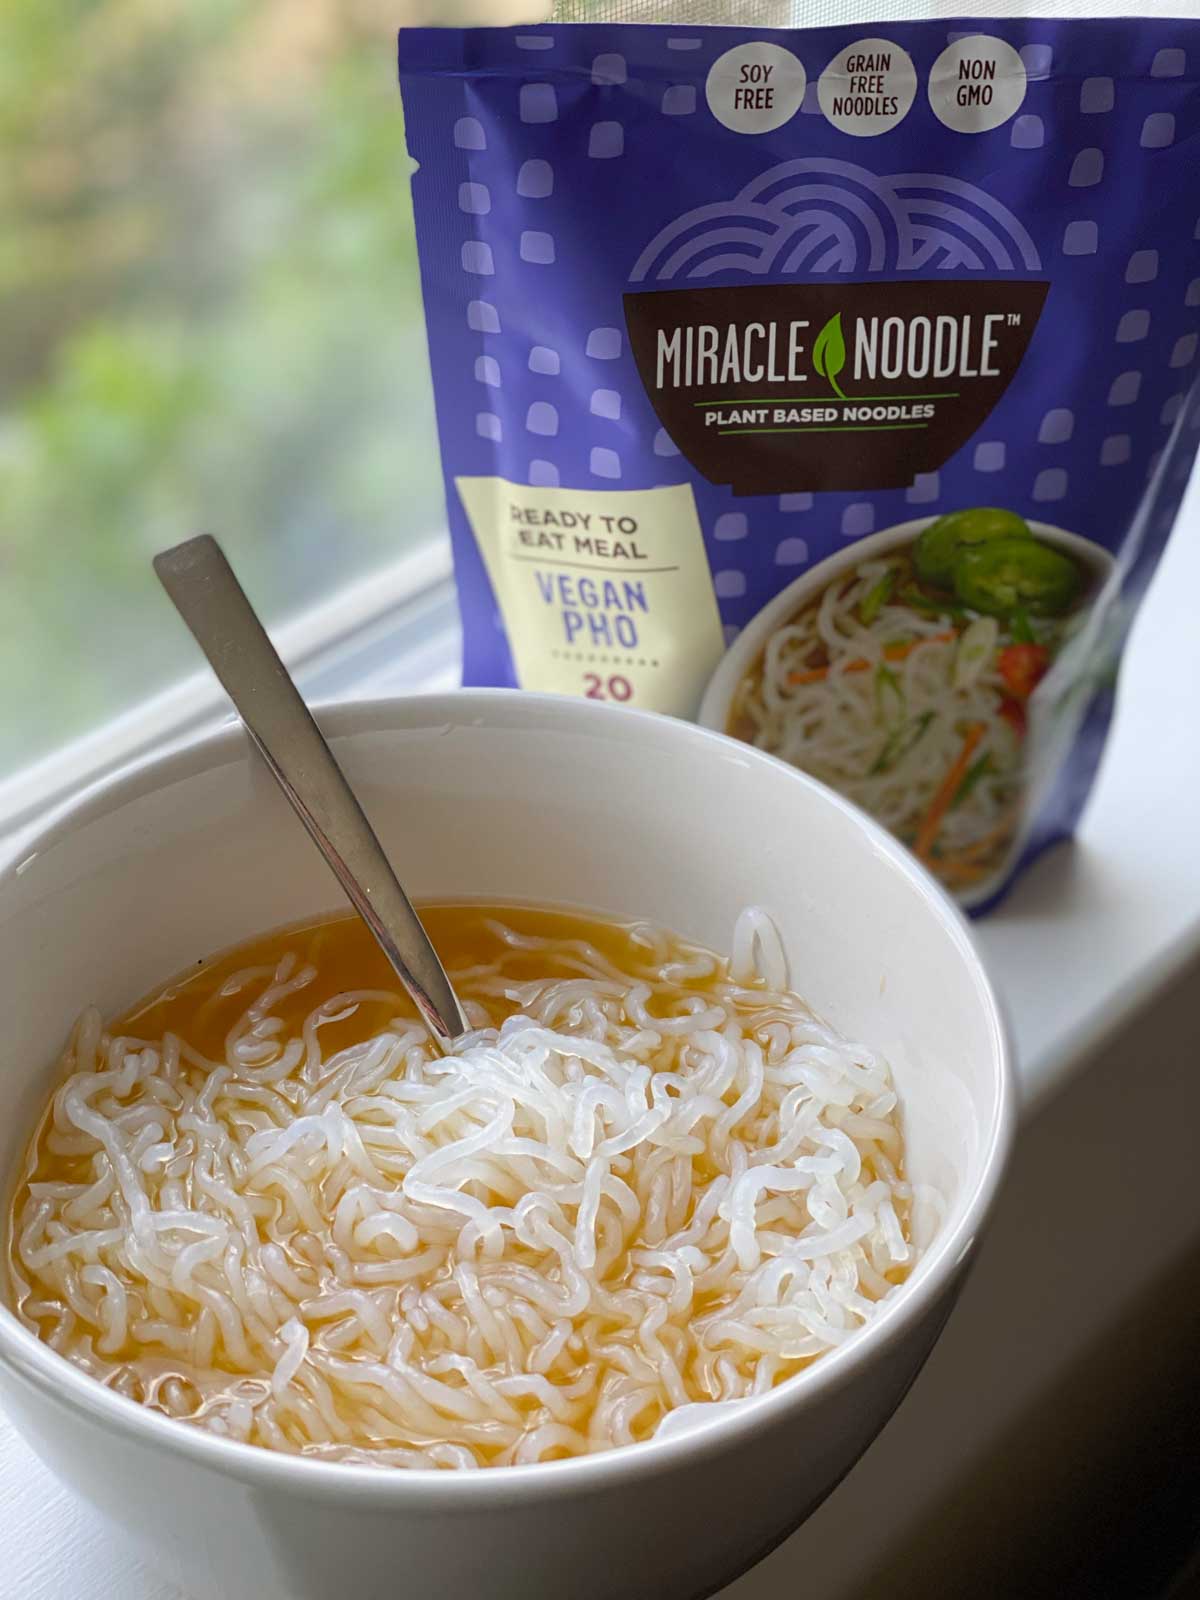 miracle noodle vegan pho in bowl next to package